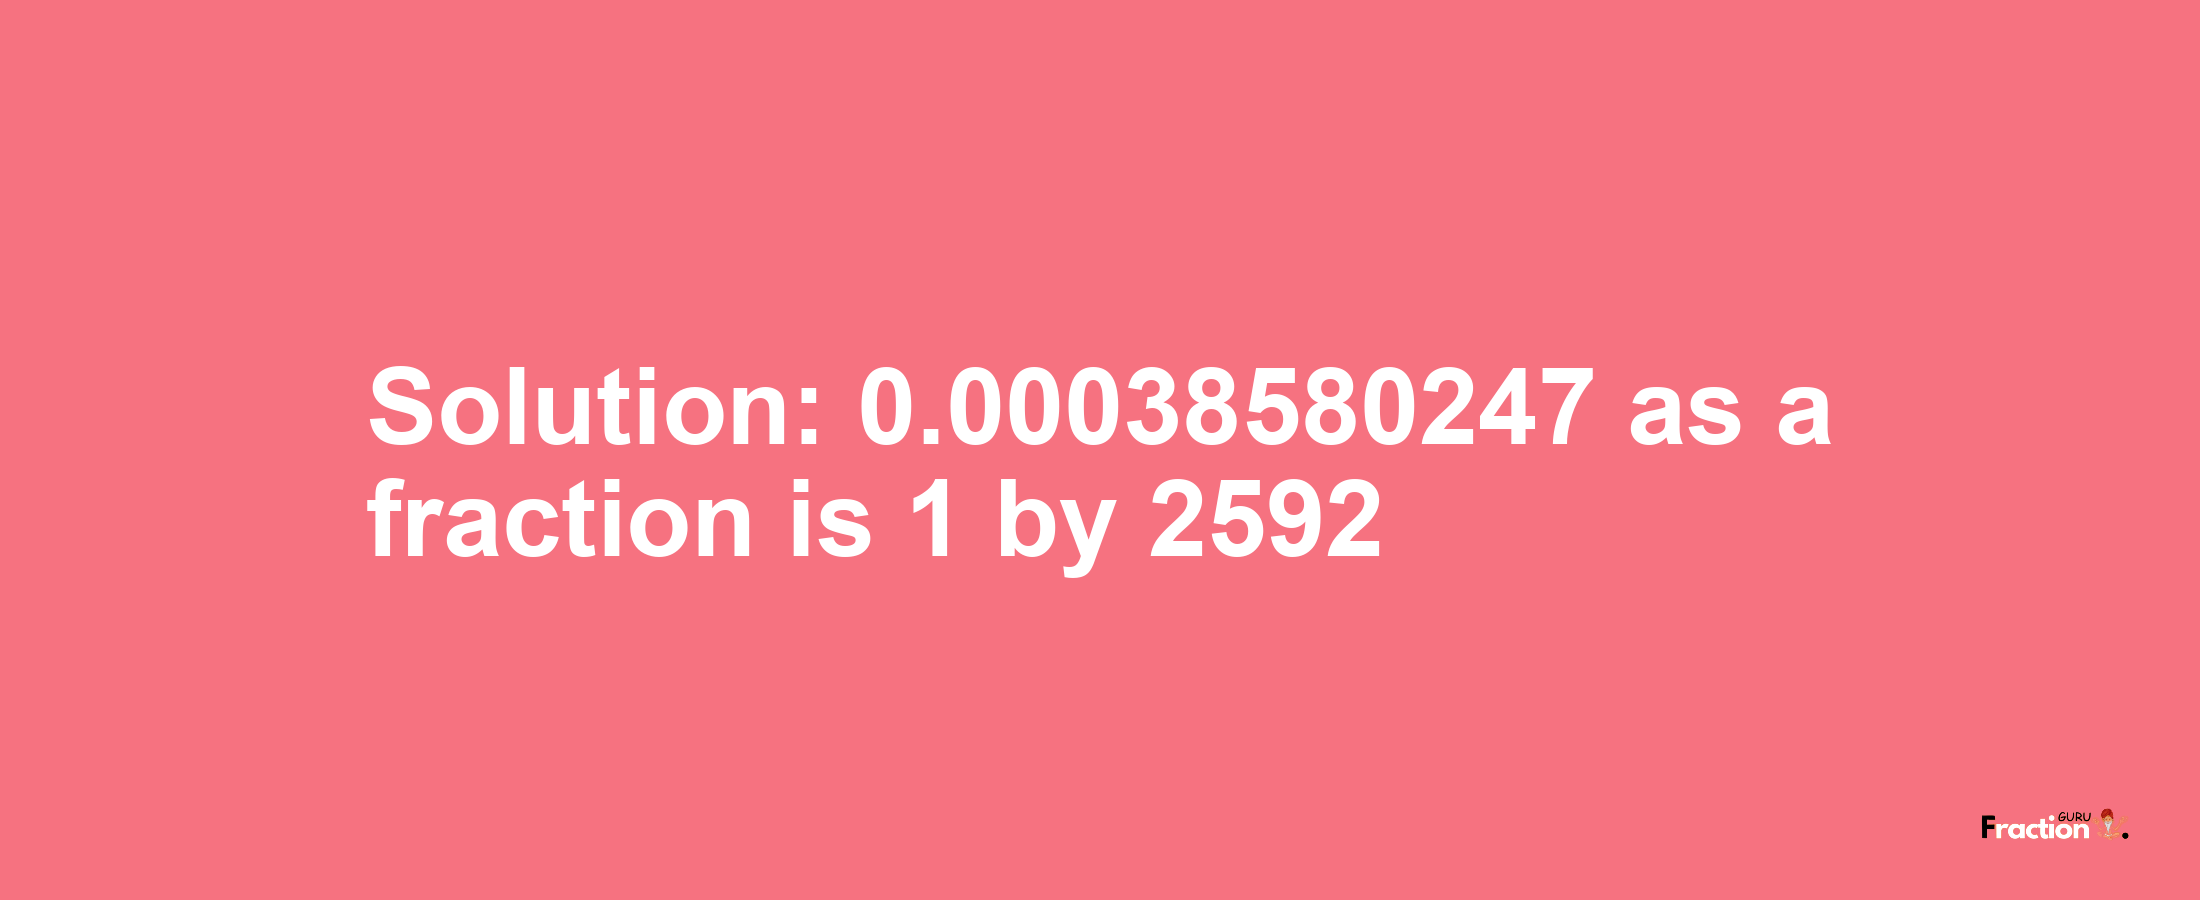 Solution:0.00038580247 as a fraction is 1/2592